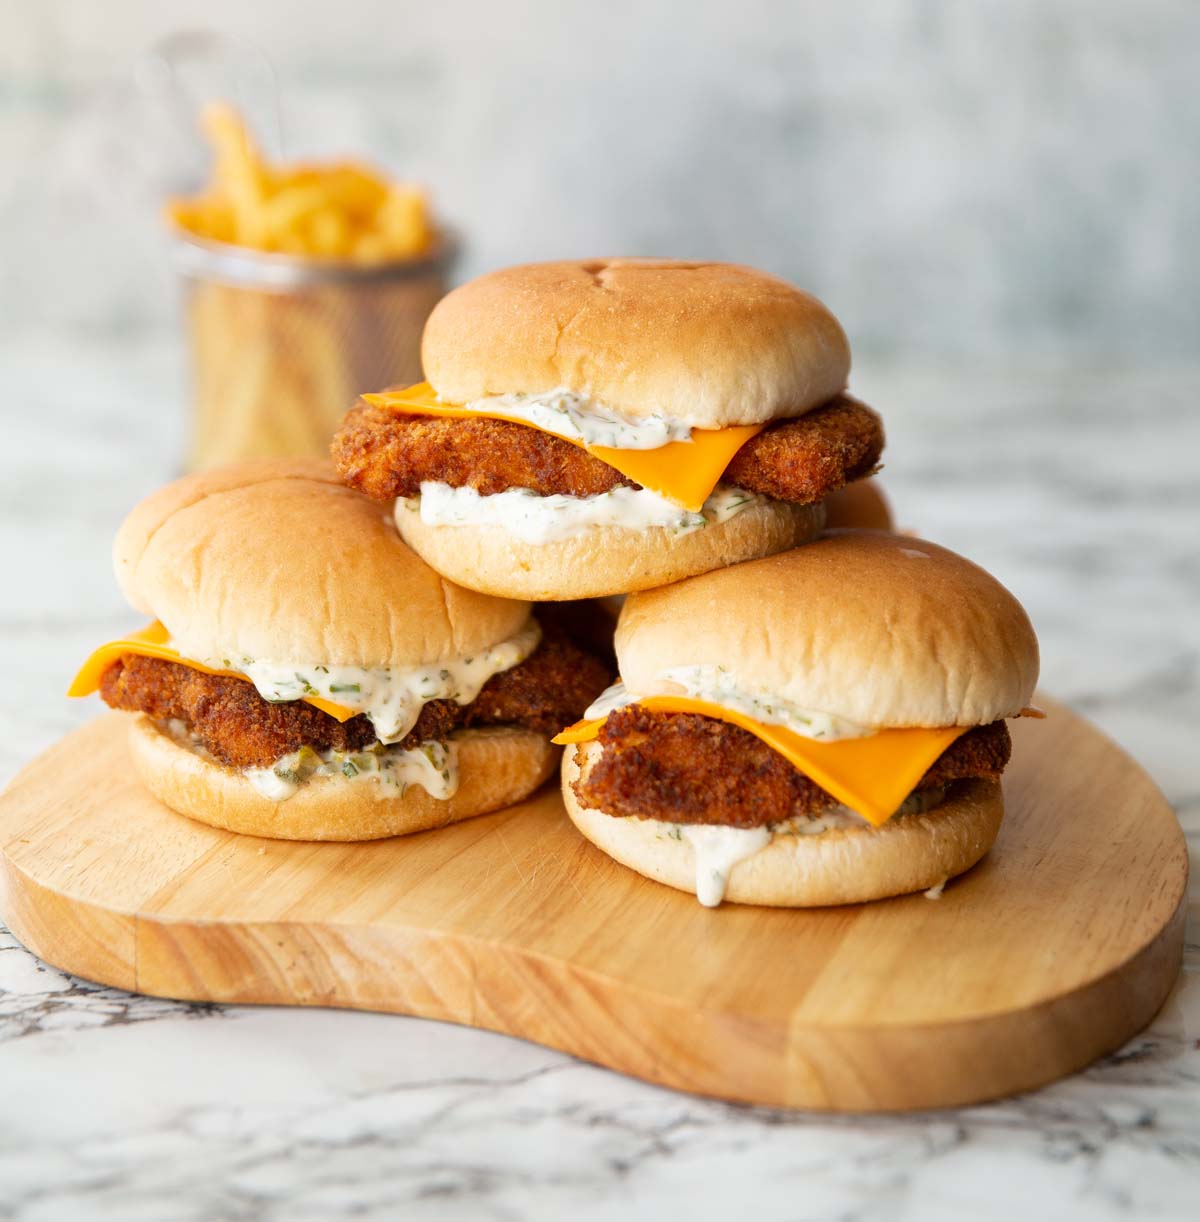 3 homemade filet-o-fish stacked on each other on wooden board with fries in the background